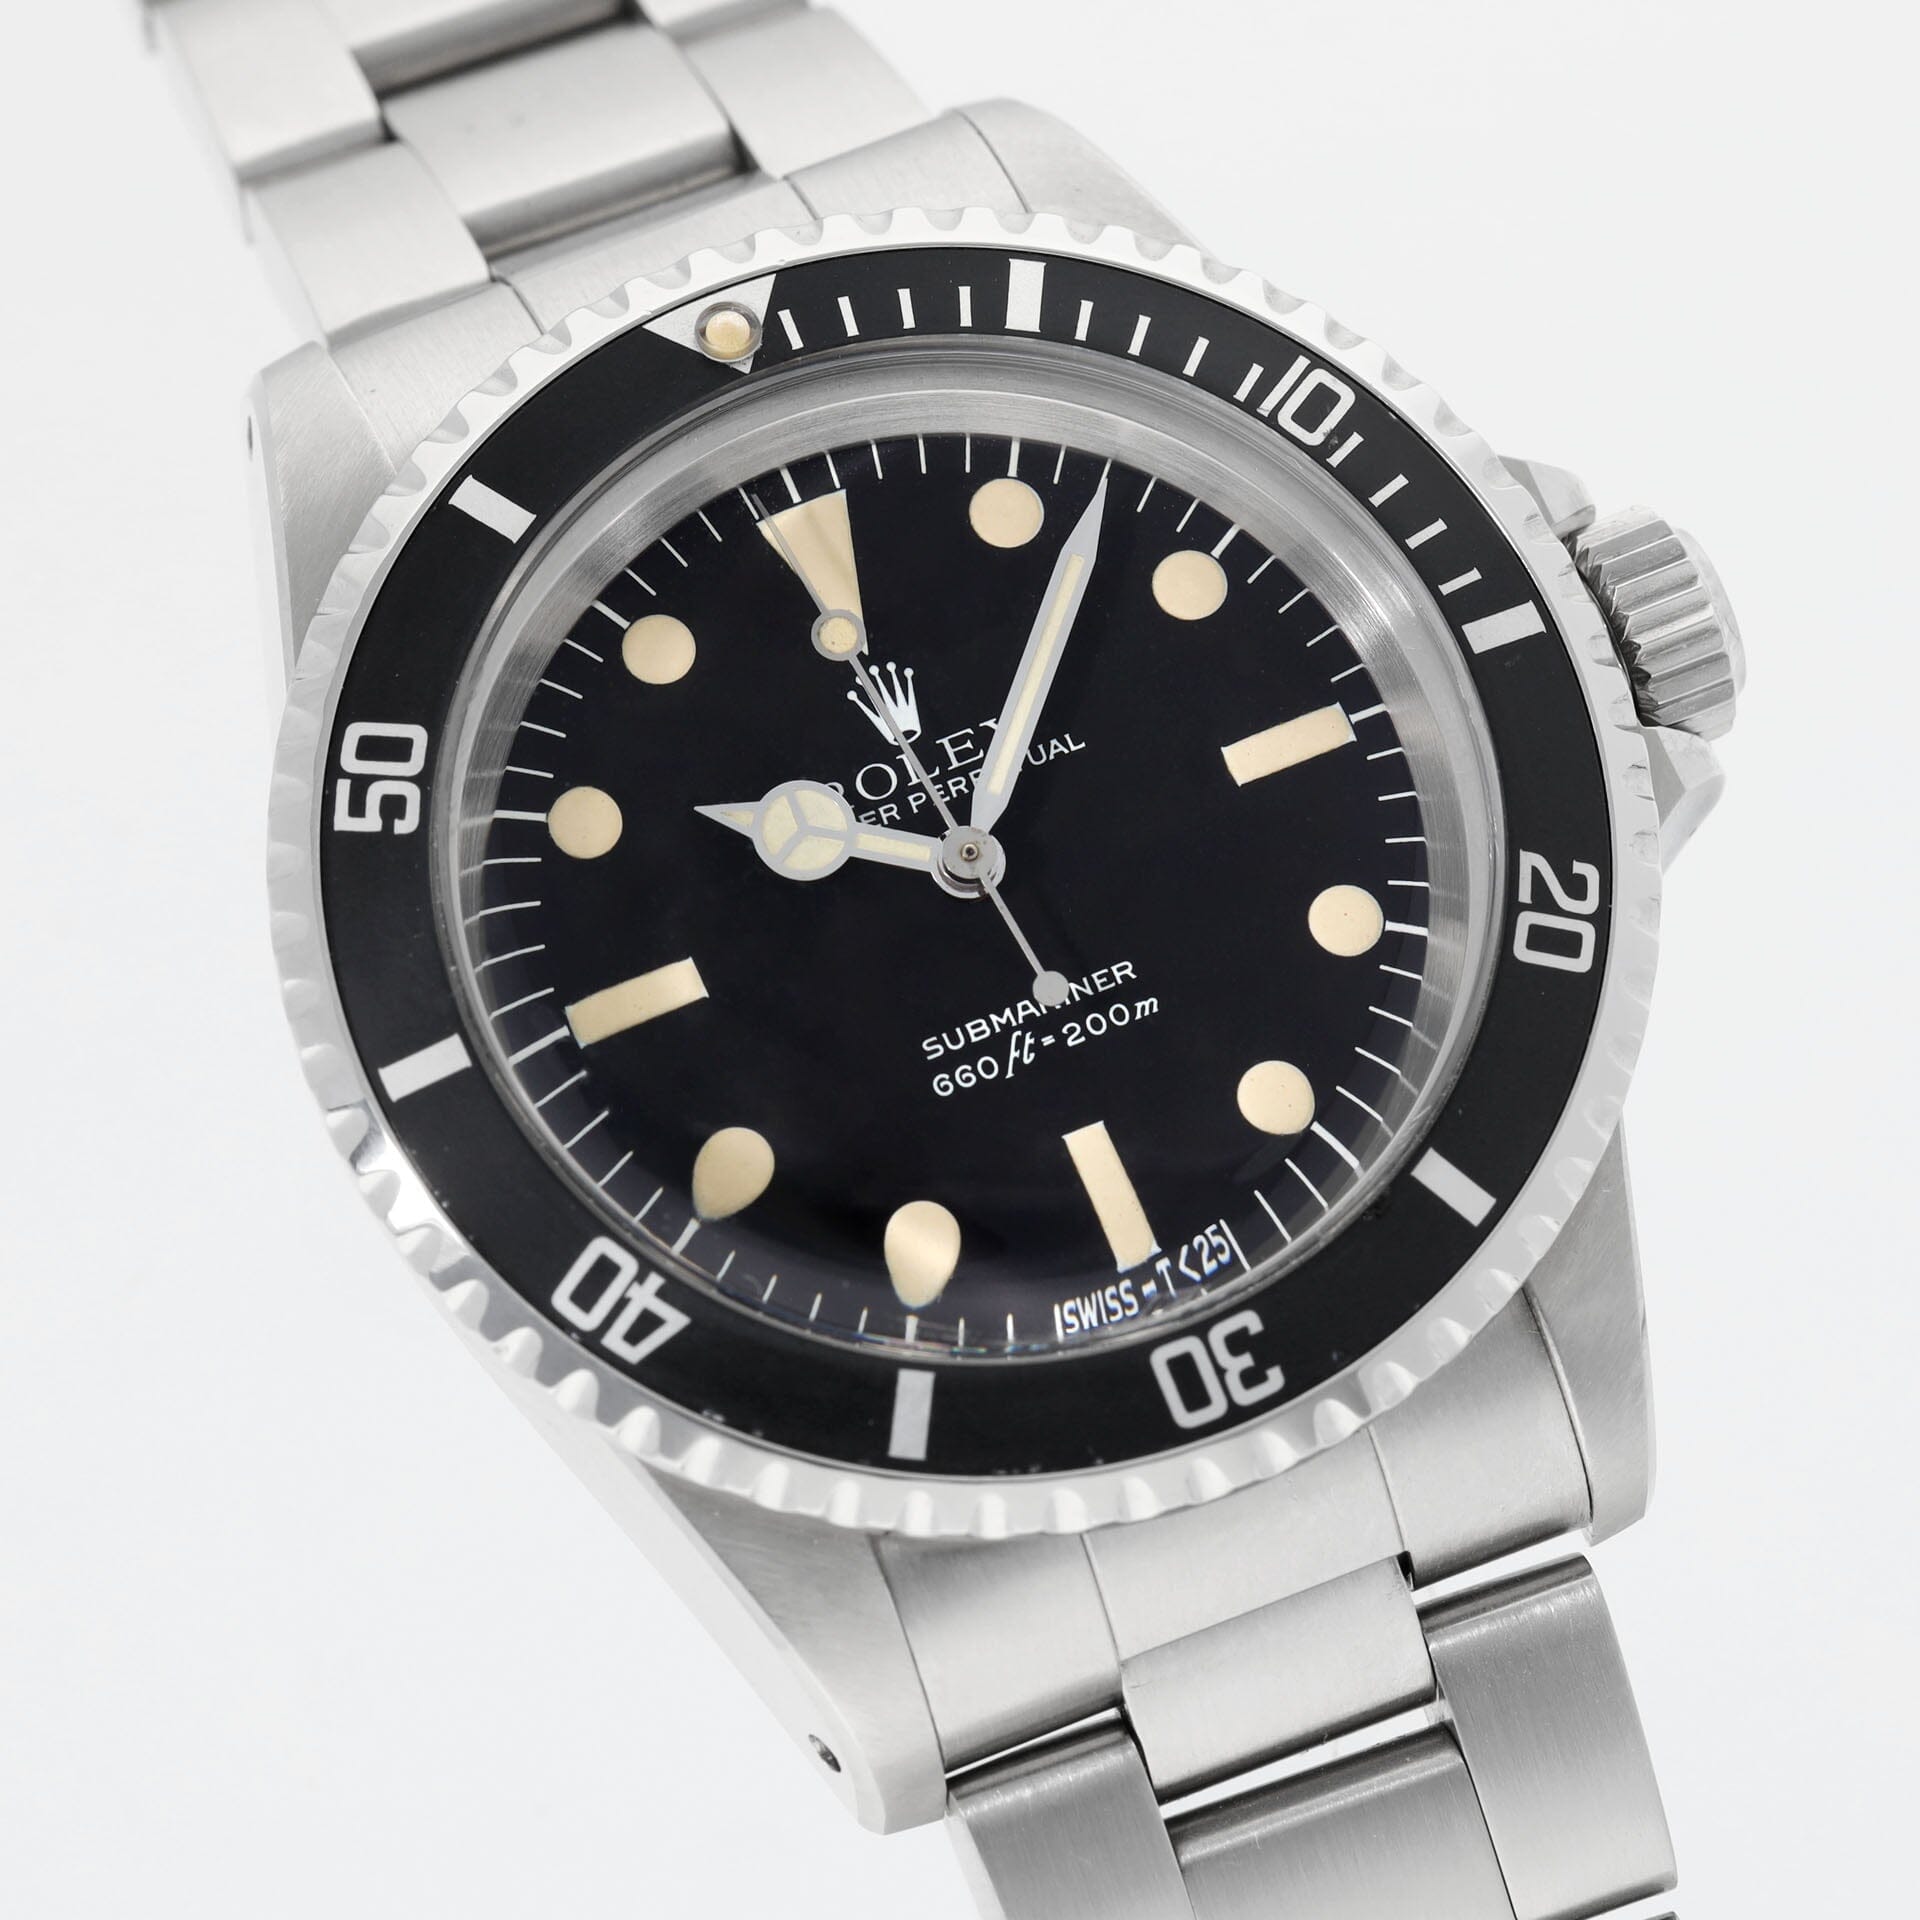 Rolex Submariner 5513 Mk 3 Maxi Dial Box and Papers